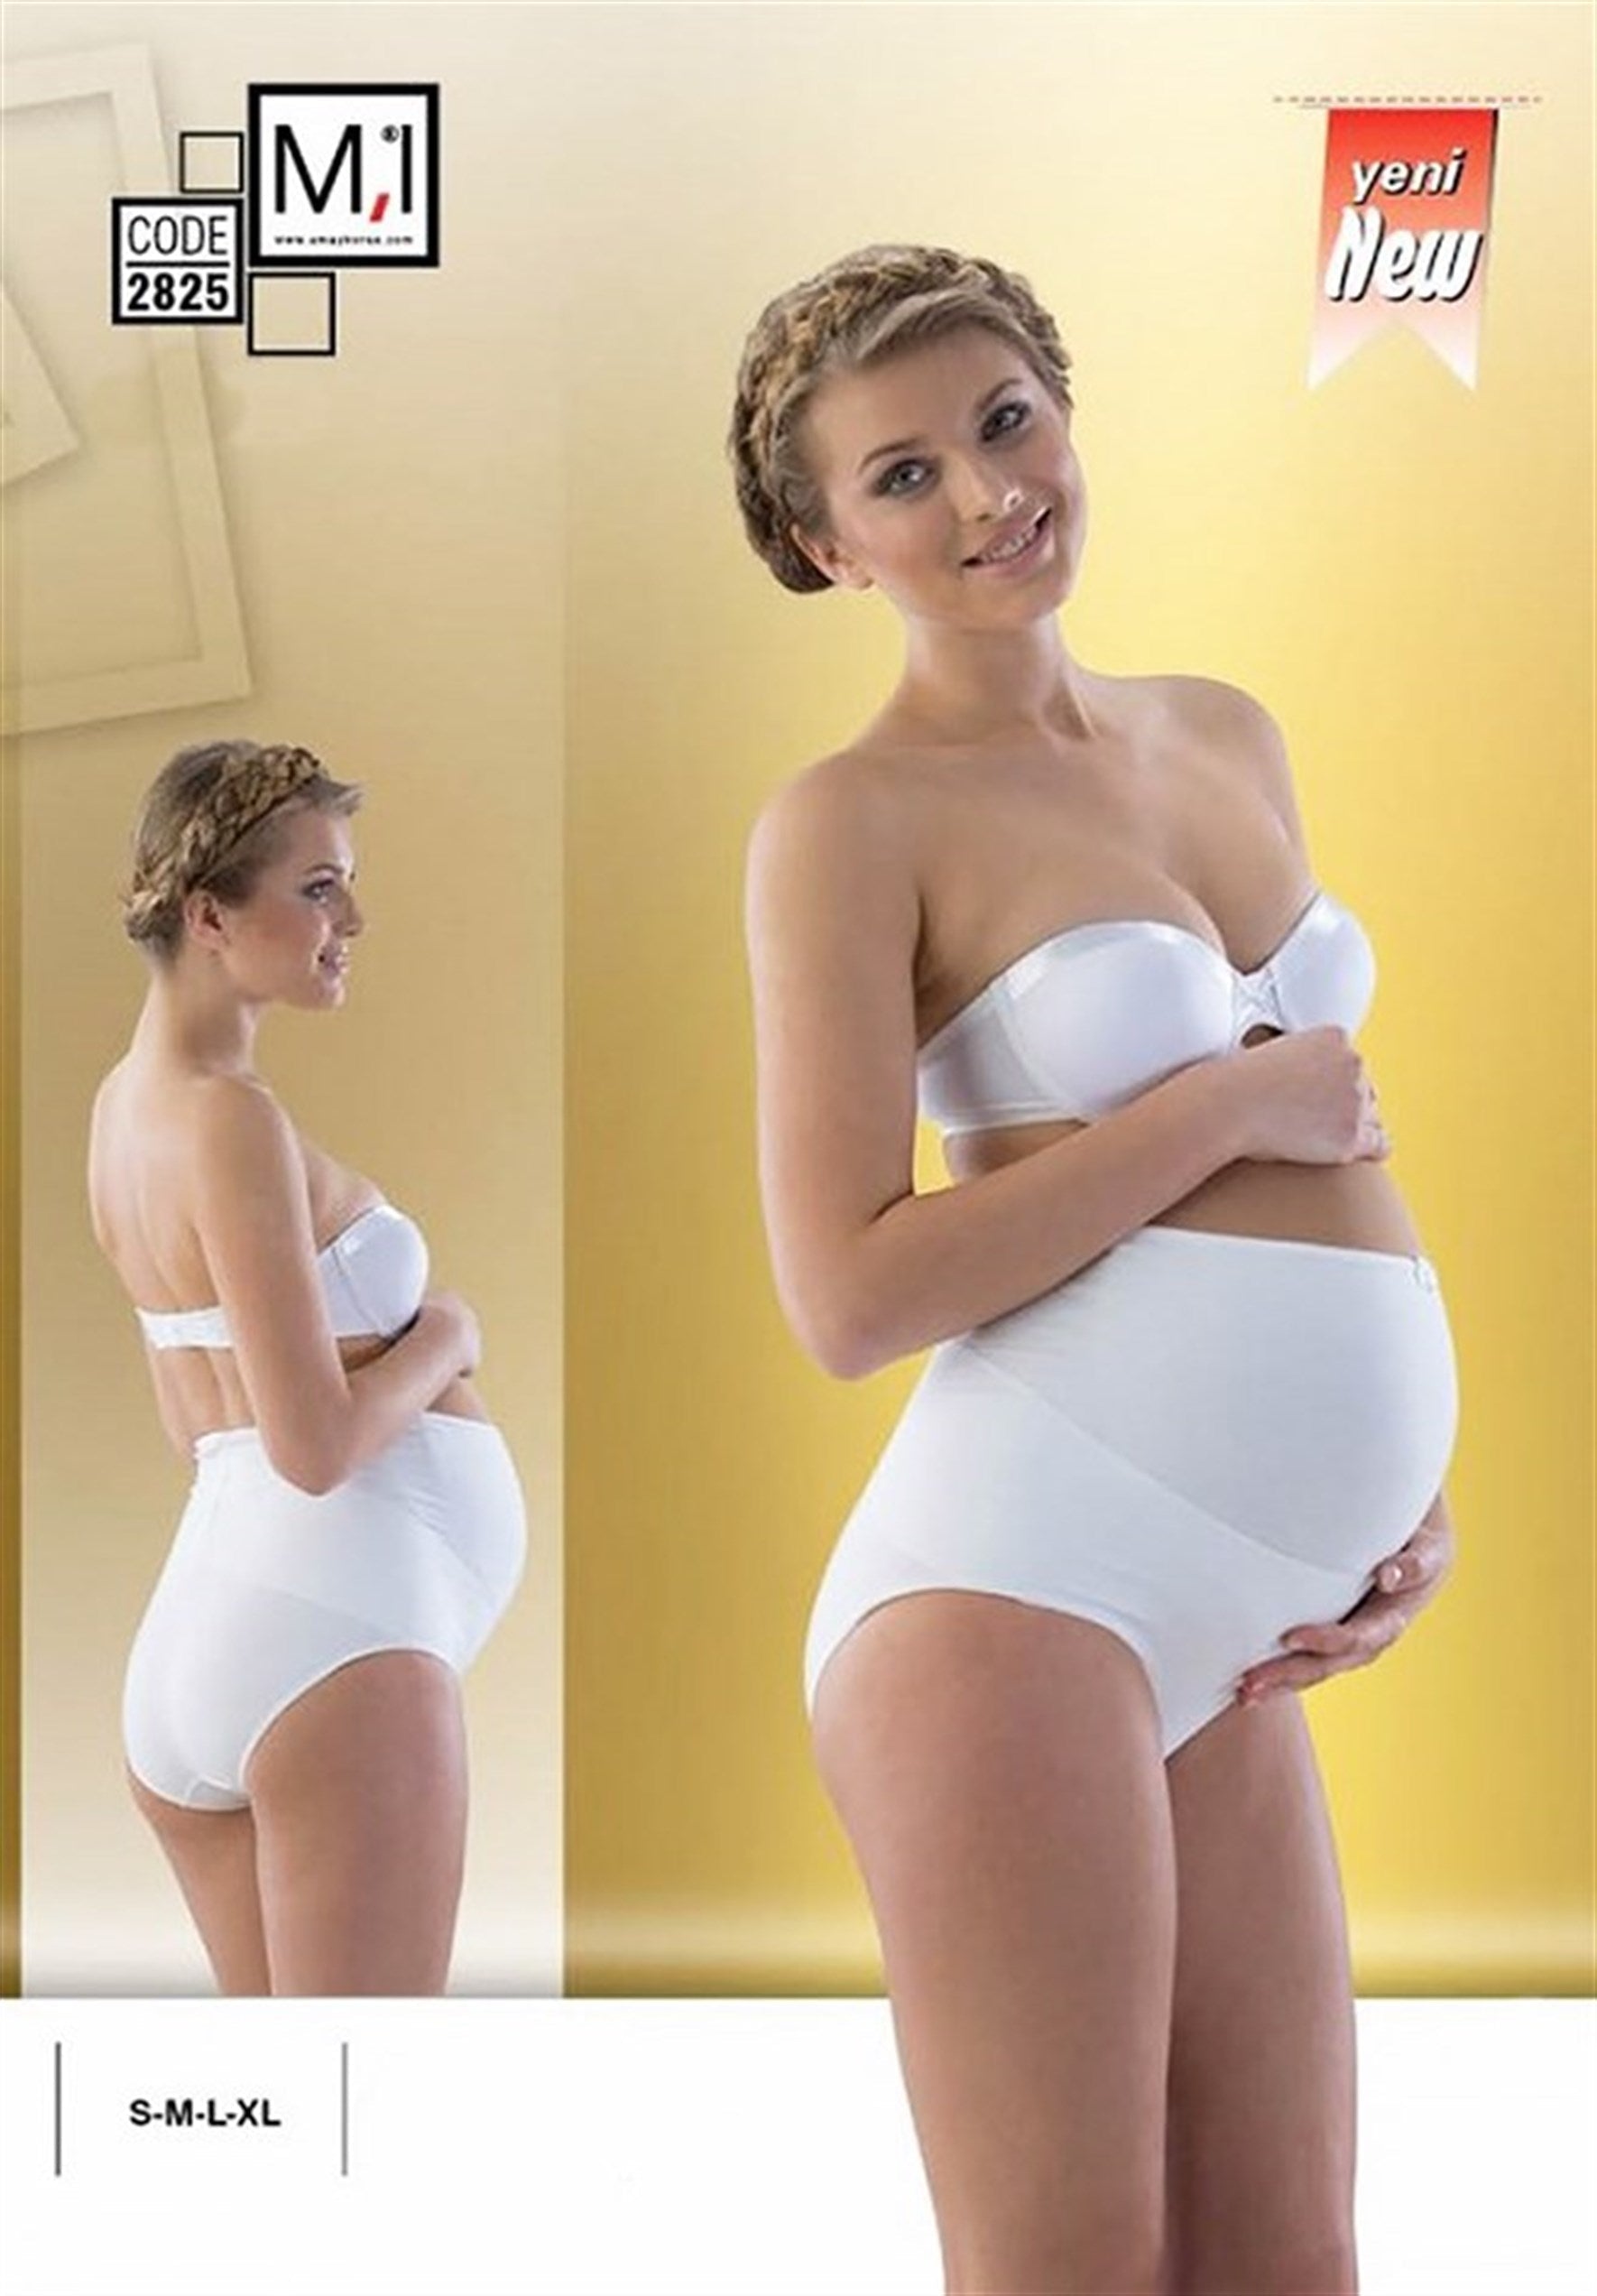 Shopymommy 2825 Abdominal Support Belt Maternity Panties